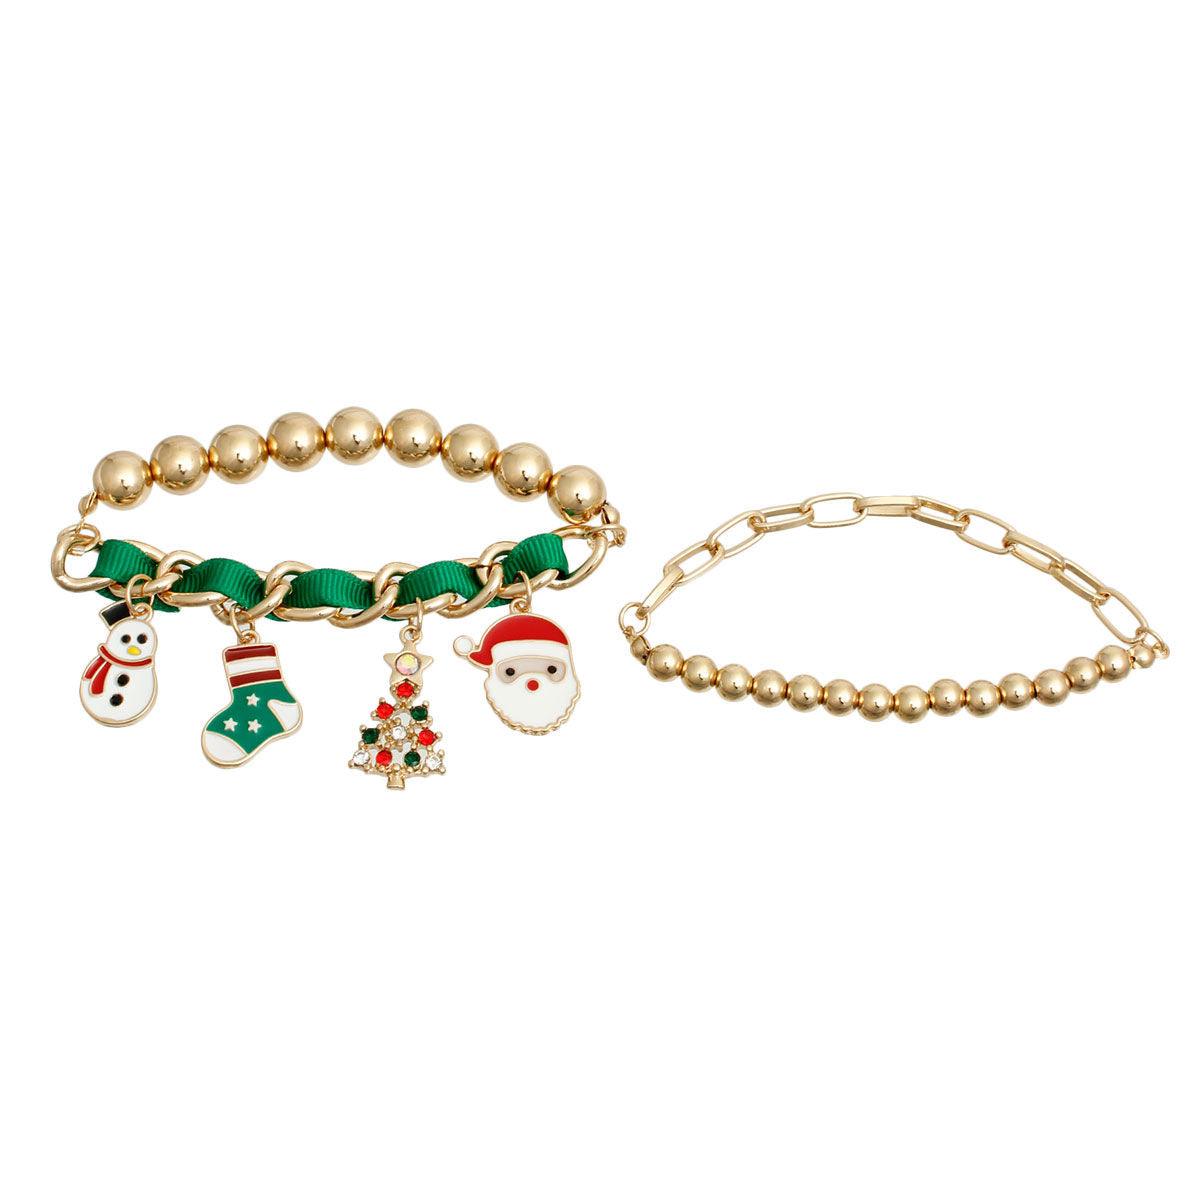 Get Festive with Our Christmas Tree & Charms Bracelet Set